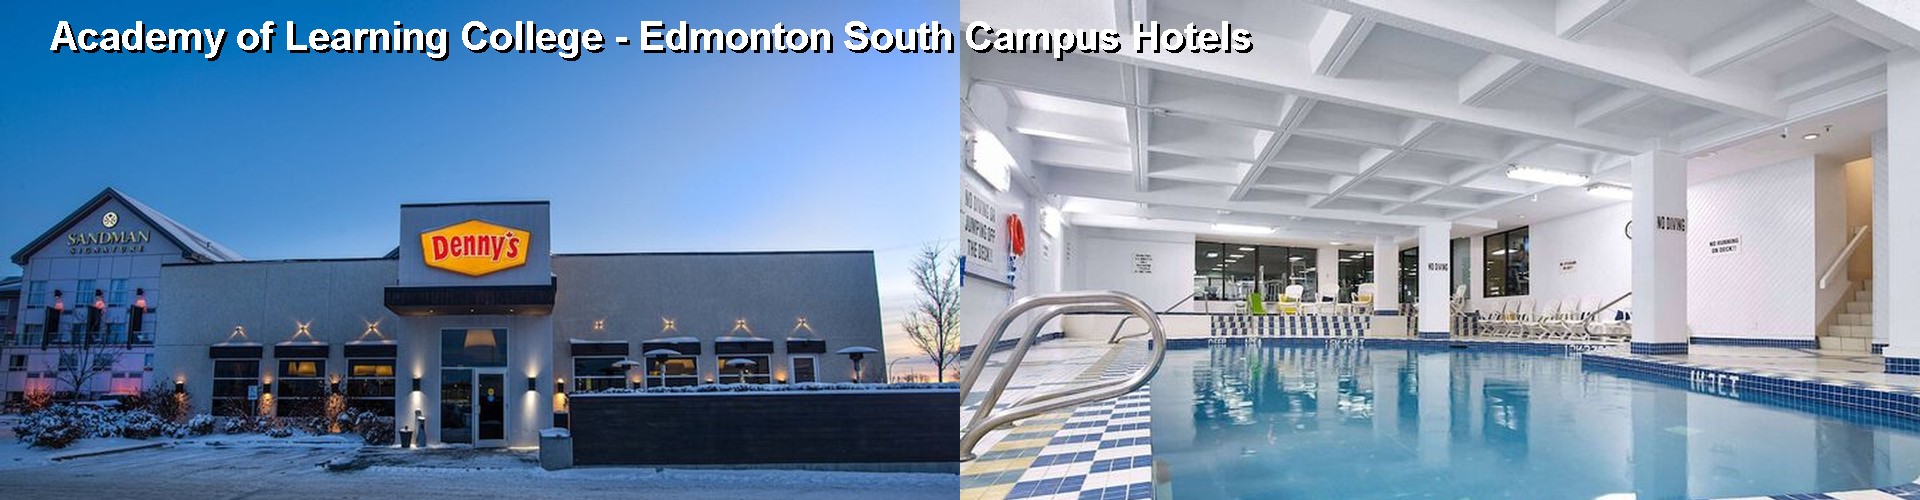 5 Best Hotels near Academy of Learning College - Edmonton South Campus